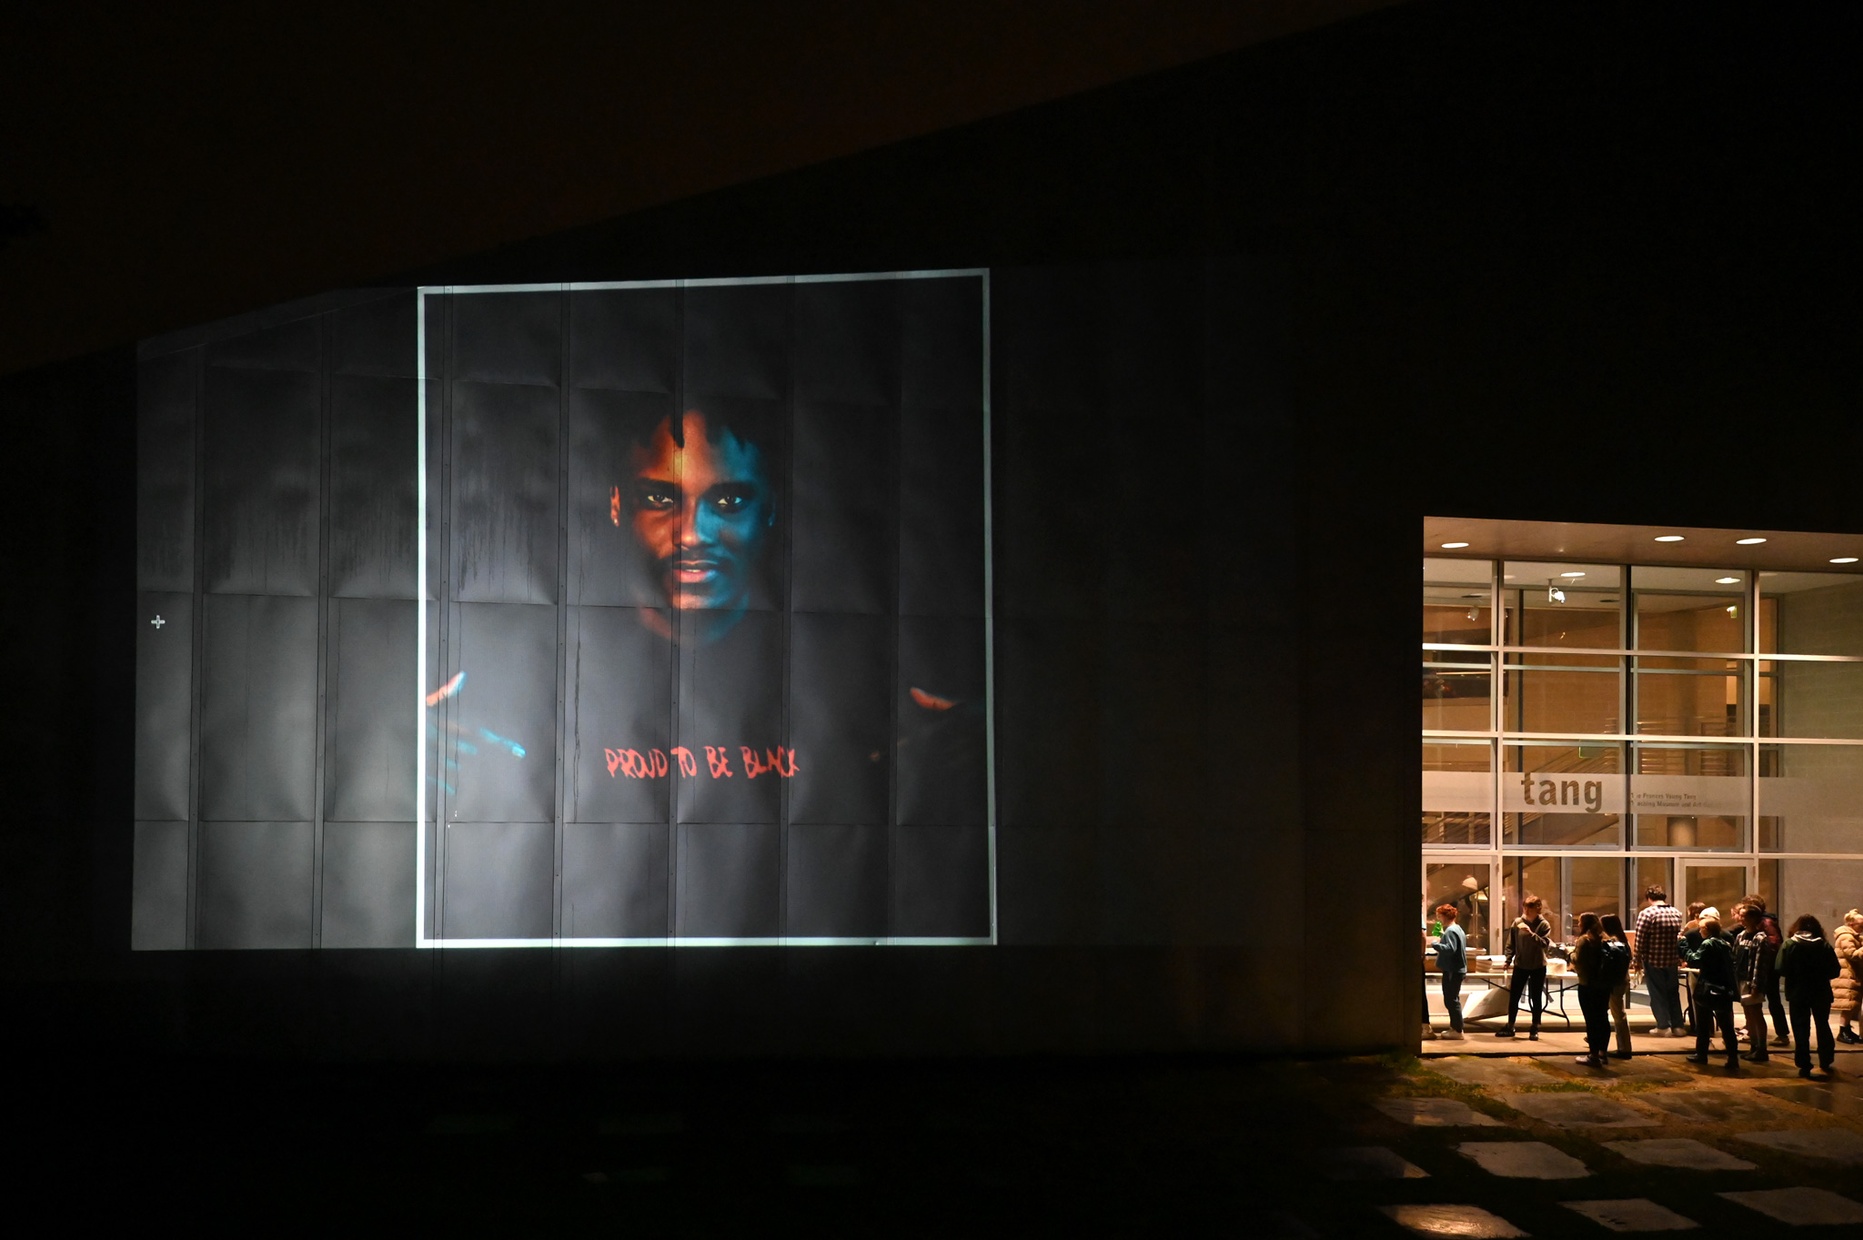 A projection against the side of a building shows a Black man with a shirt that reads "PROUD TO BE BLACK."